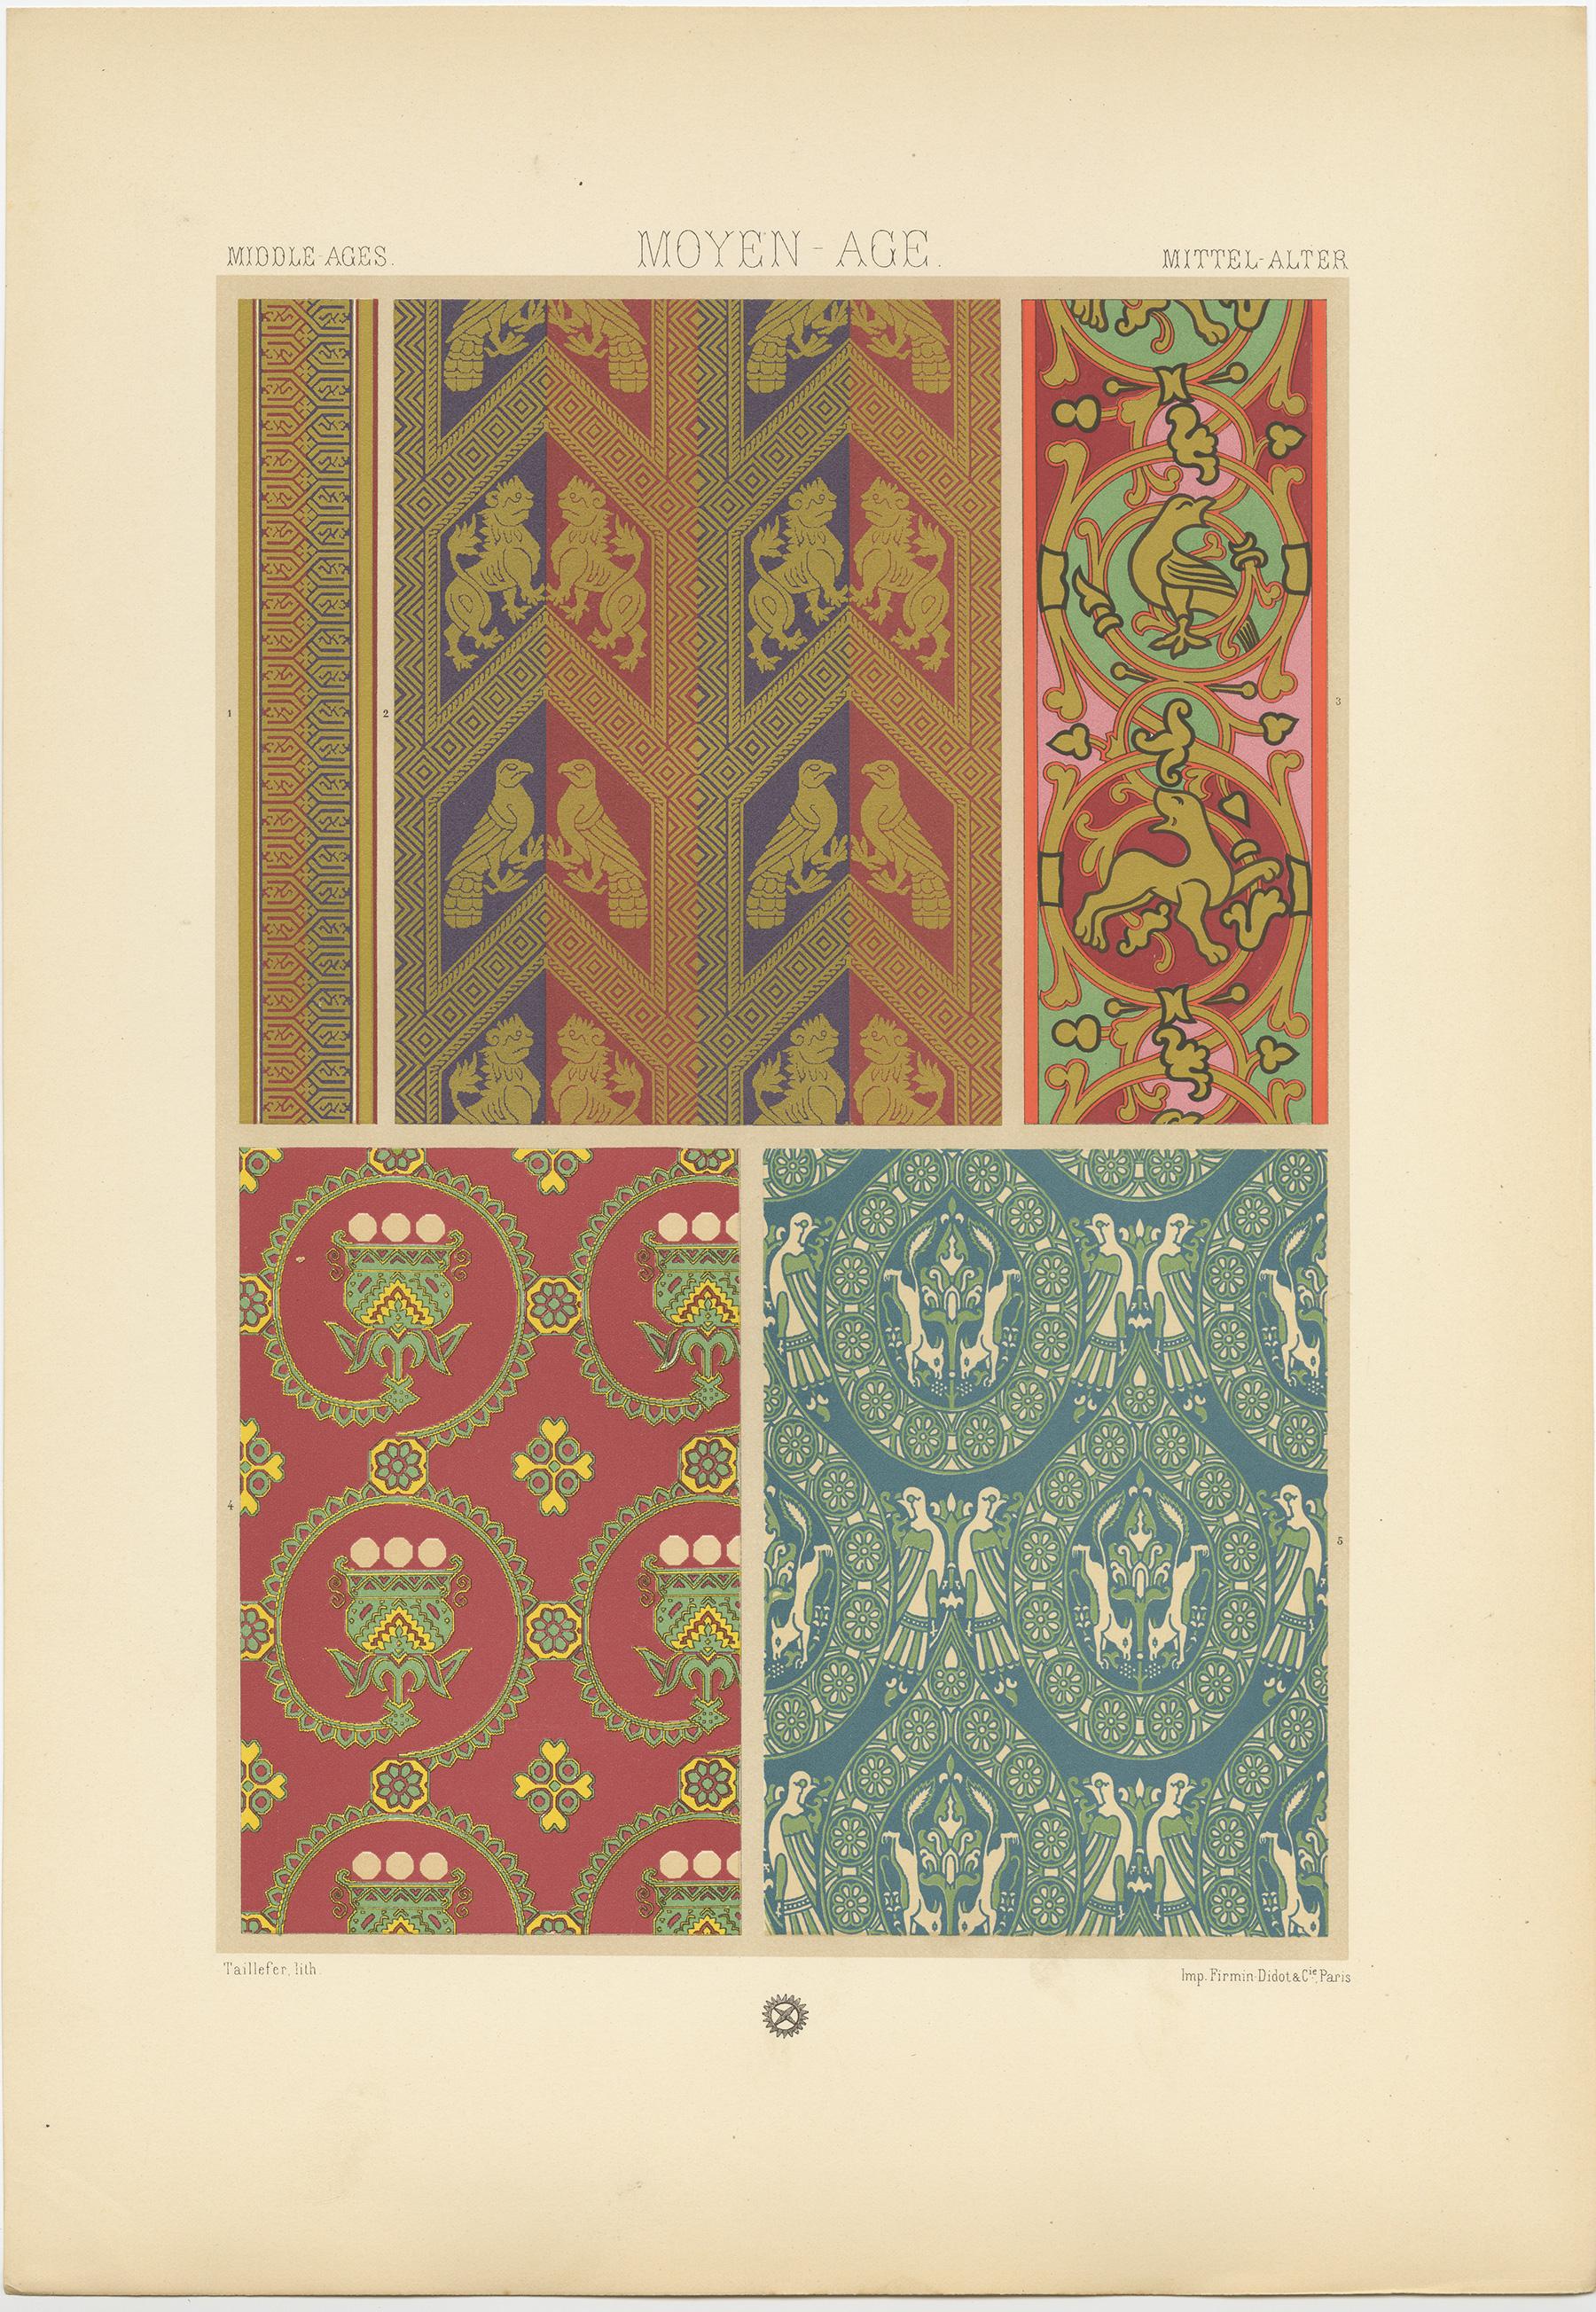 Antique print titled 'Middle Ages - Moyen Age - Mittel Alter'. Chromolithograph of design from textiles imported into Europe from the Near East
ornaments. This print originates from 'l'Ornement Polychrome' by Auguste Racinet. Published circa 1890.